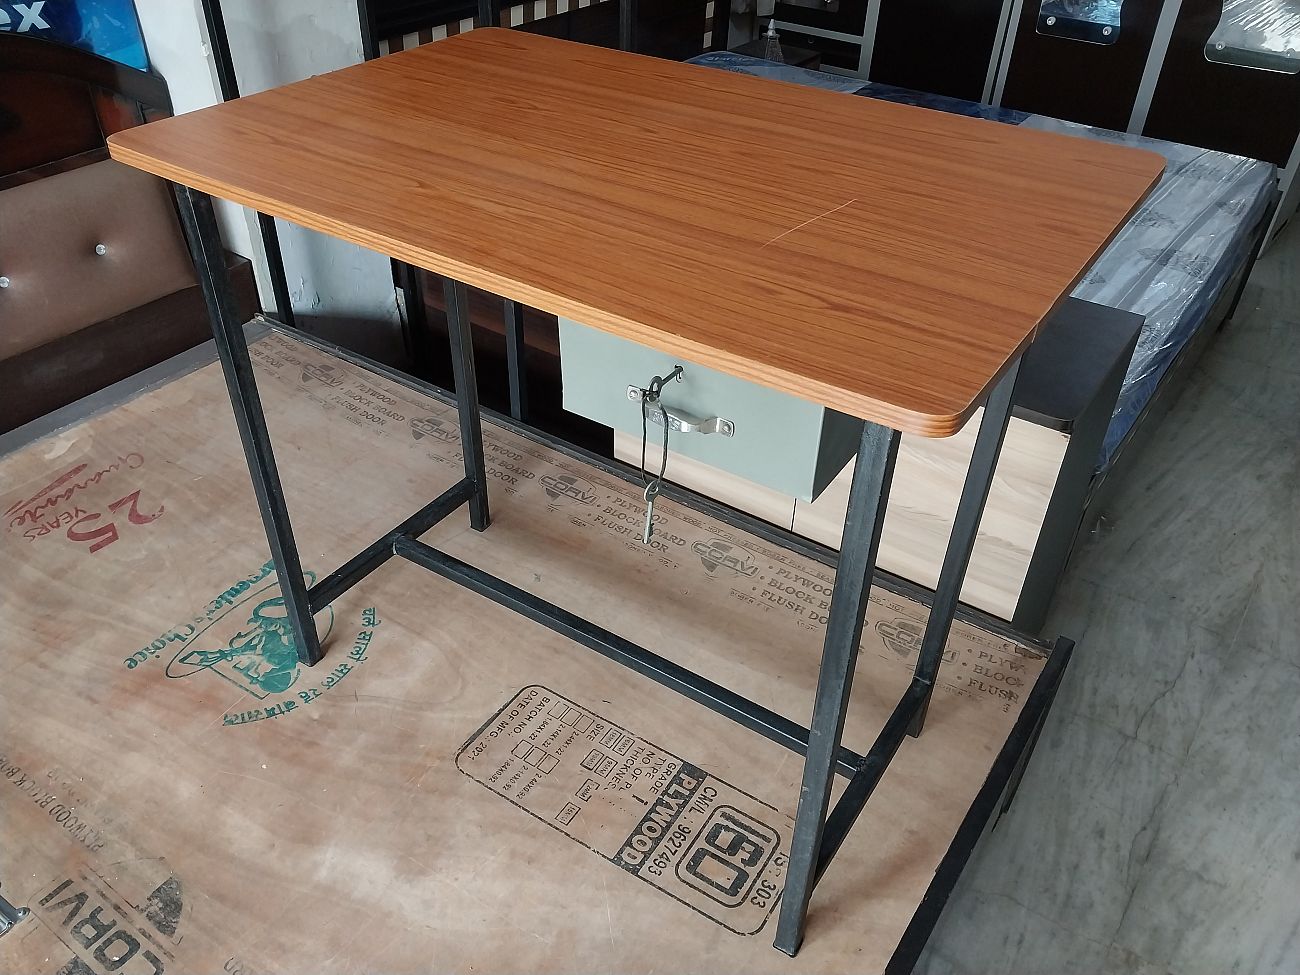 STUDY TABLE WITH DRAWER